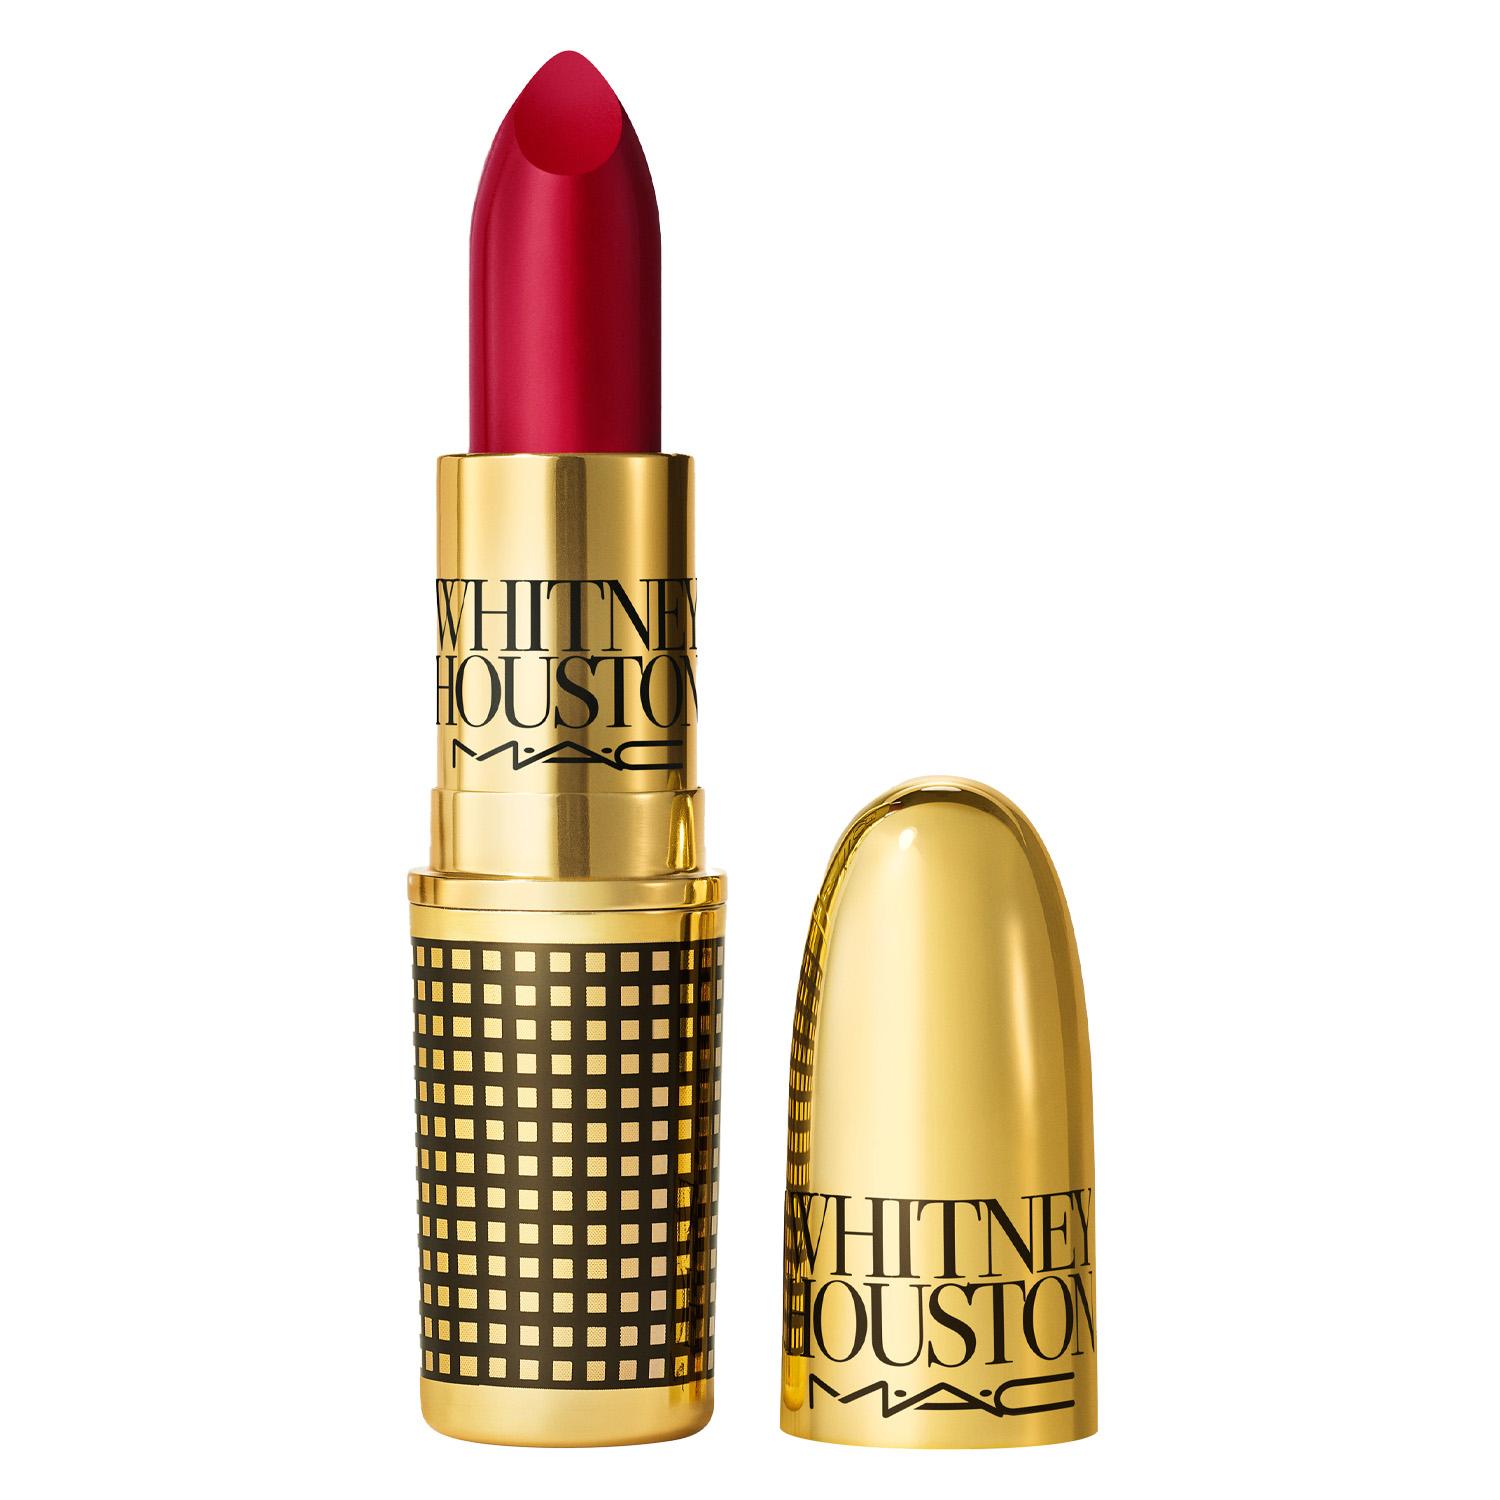 Whitney Houston Collection - Matte Lipstick Nippy's Sensual Red